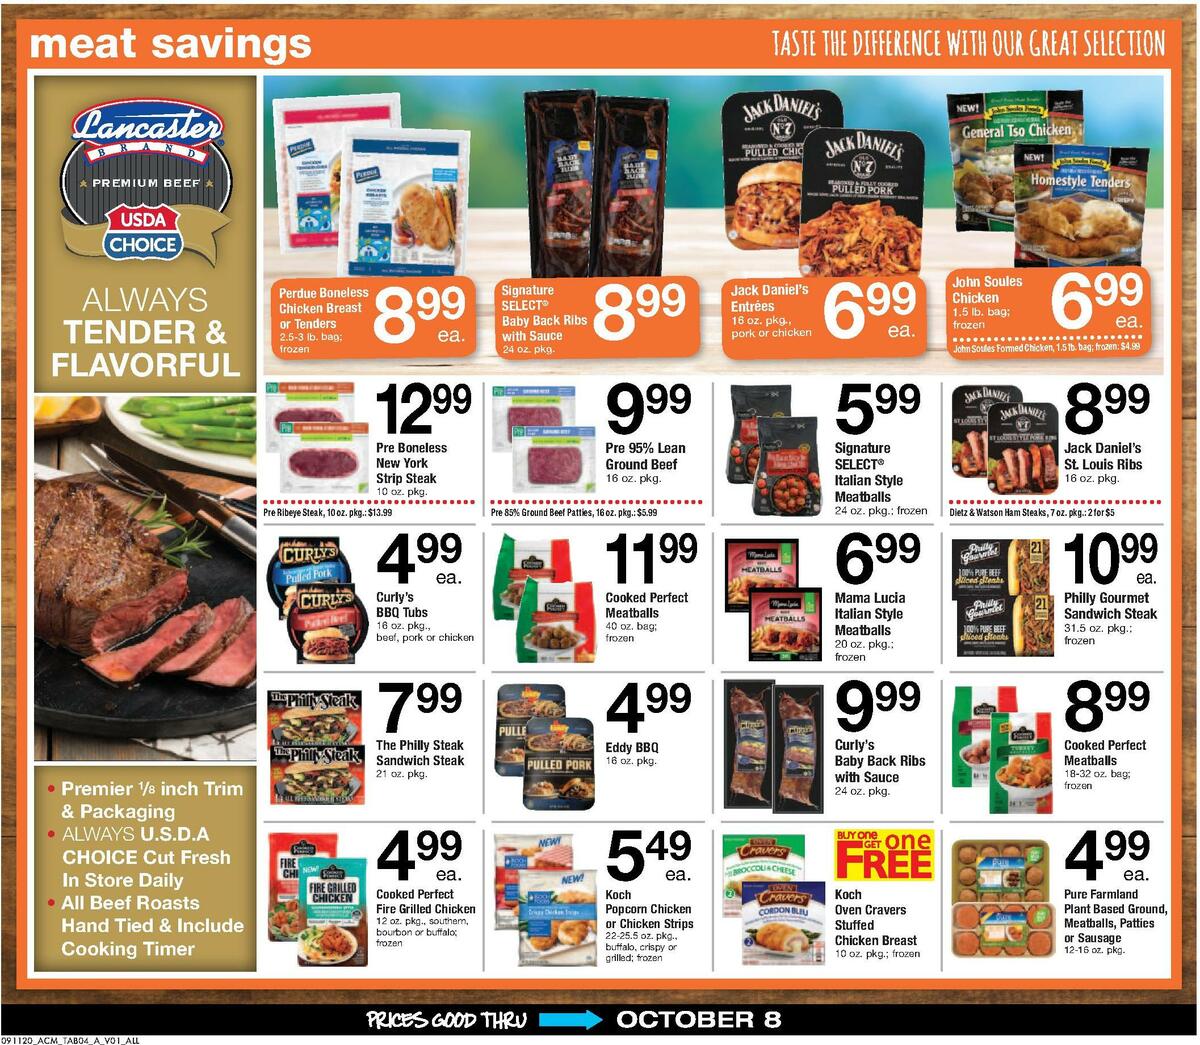 ACME Markets Big Book Weekly Ad from September 11